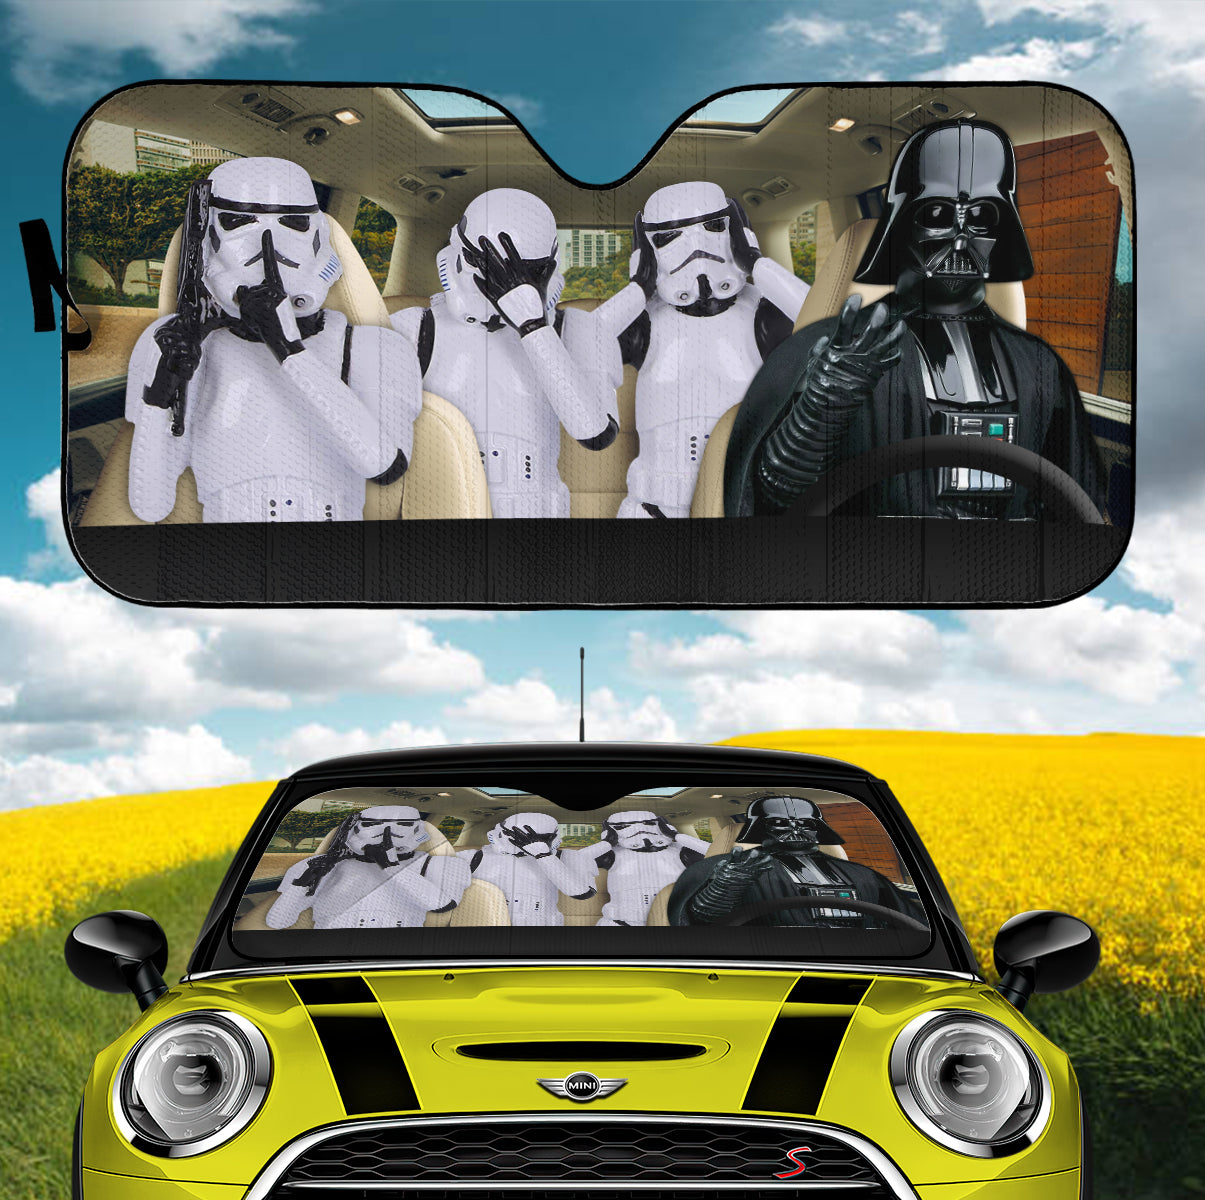 Funny Darth Vader And Starship Troopers Driving Car Auto Sunshades Nearkii